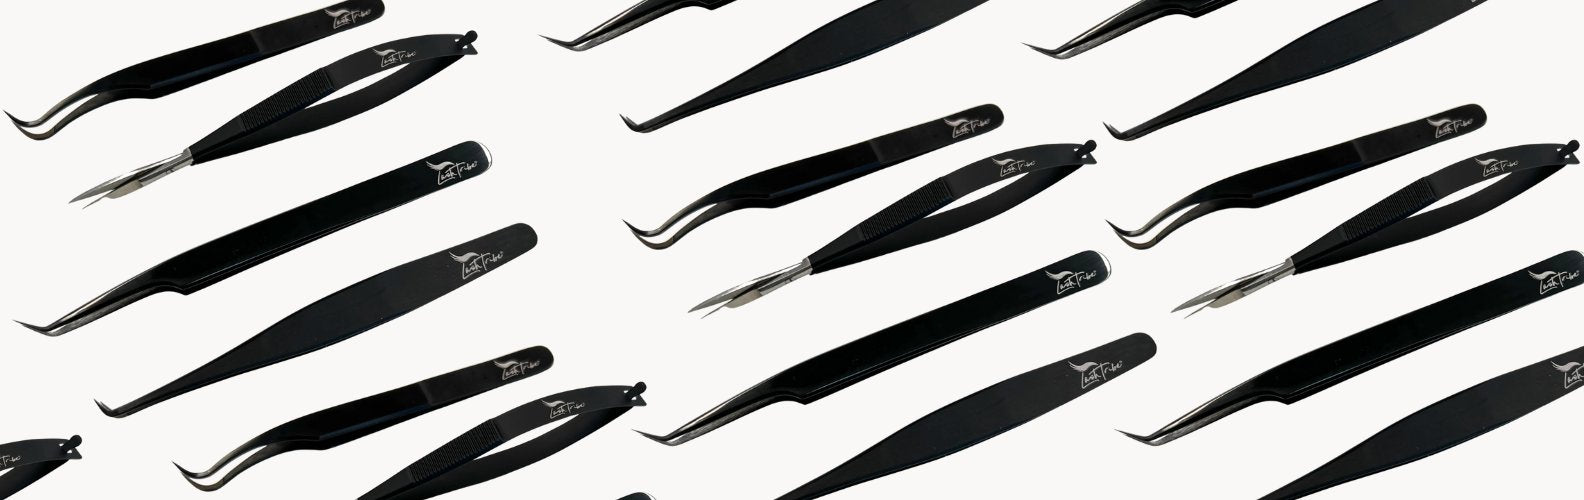 a picture of many black lash tribe tweezers on a white background